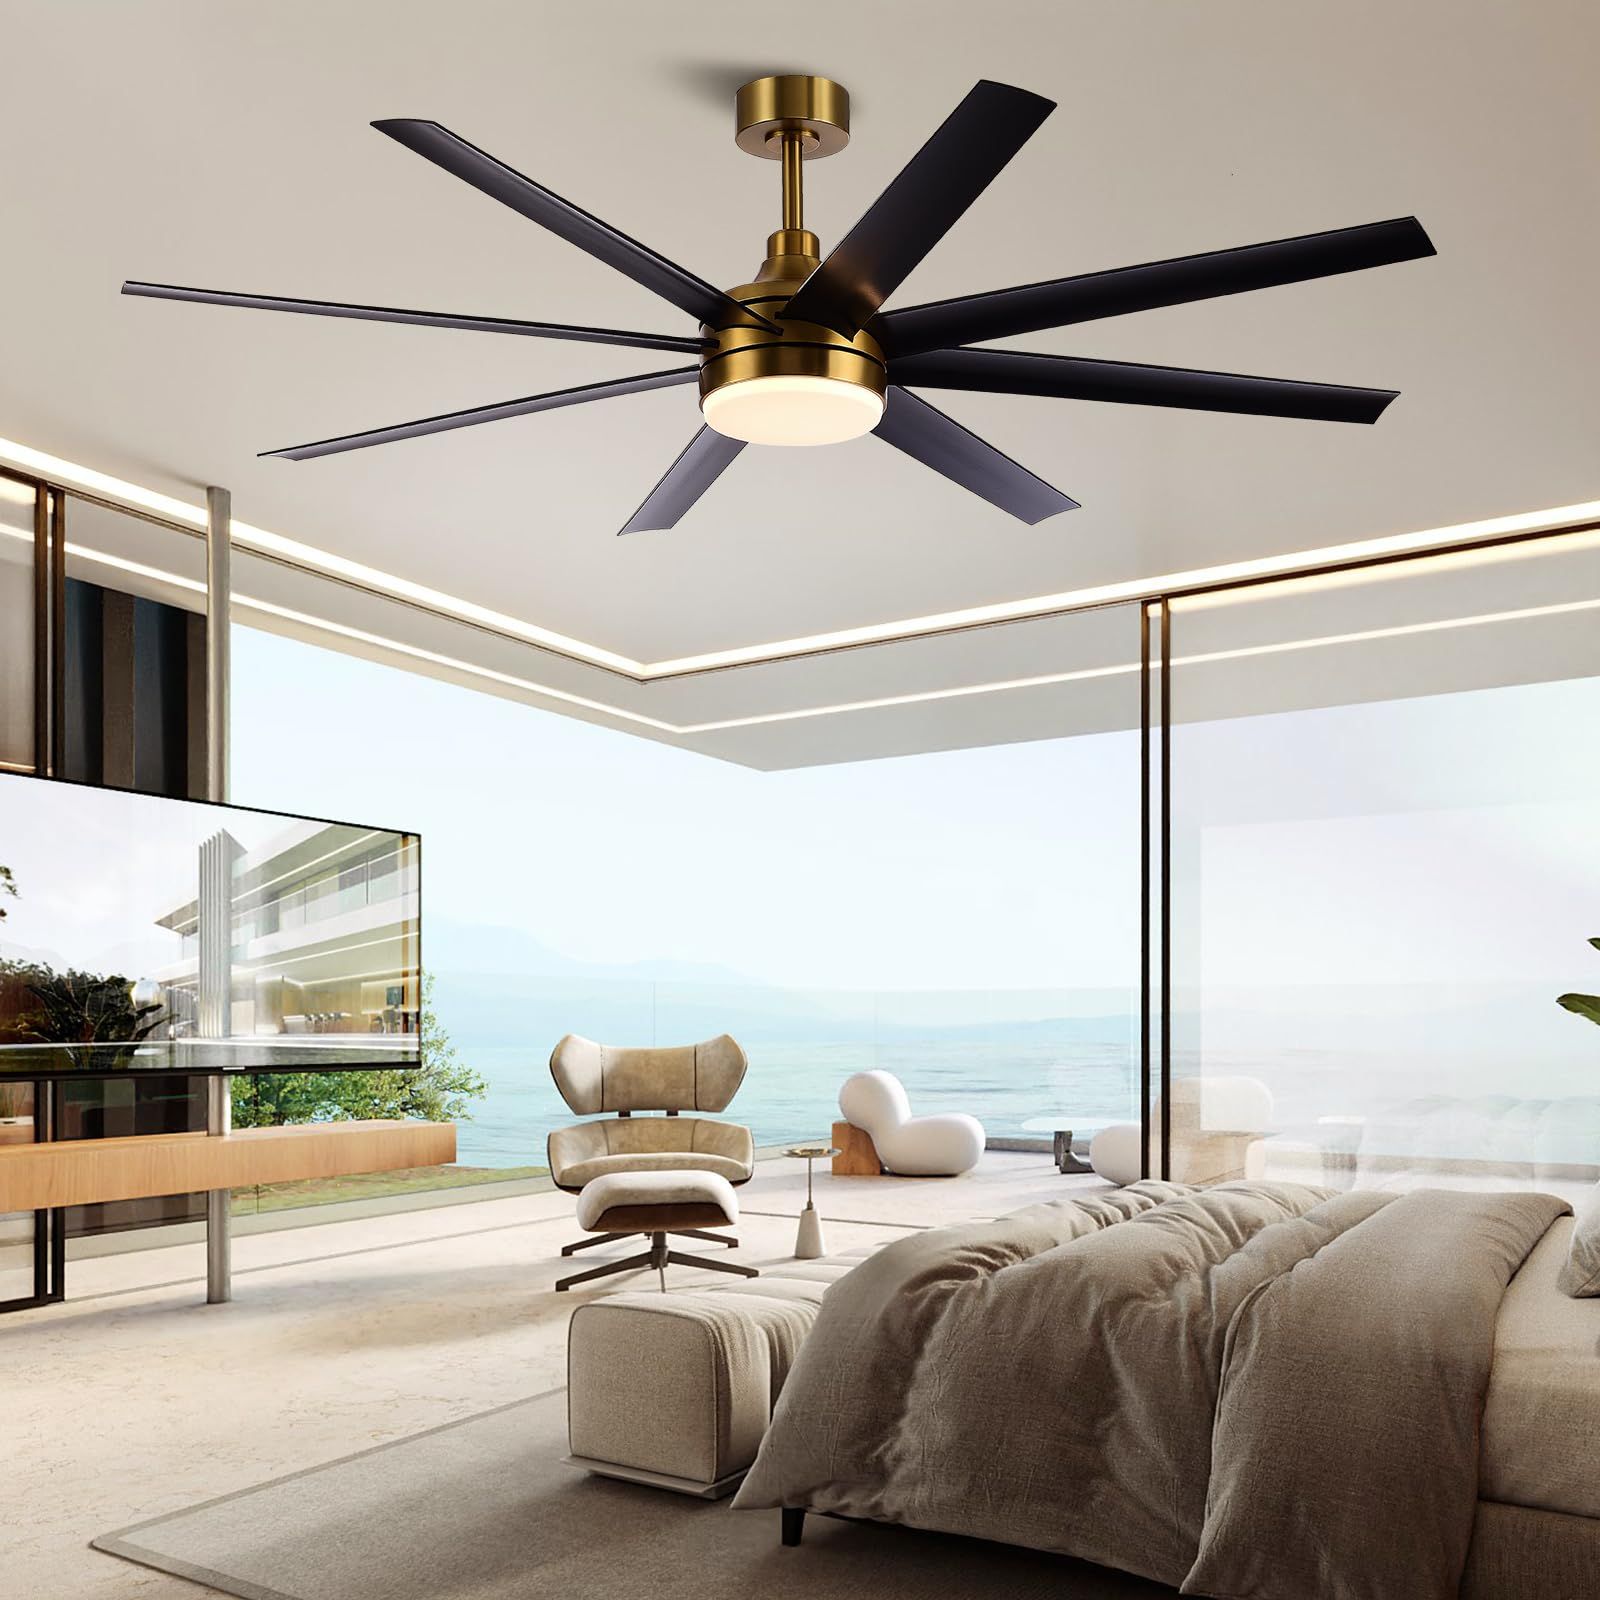 Enhance Your Sleep Sanctuary with Ceiling Fans Featuring Lights